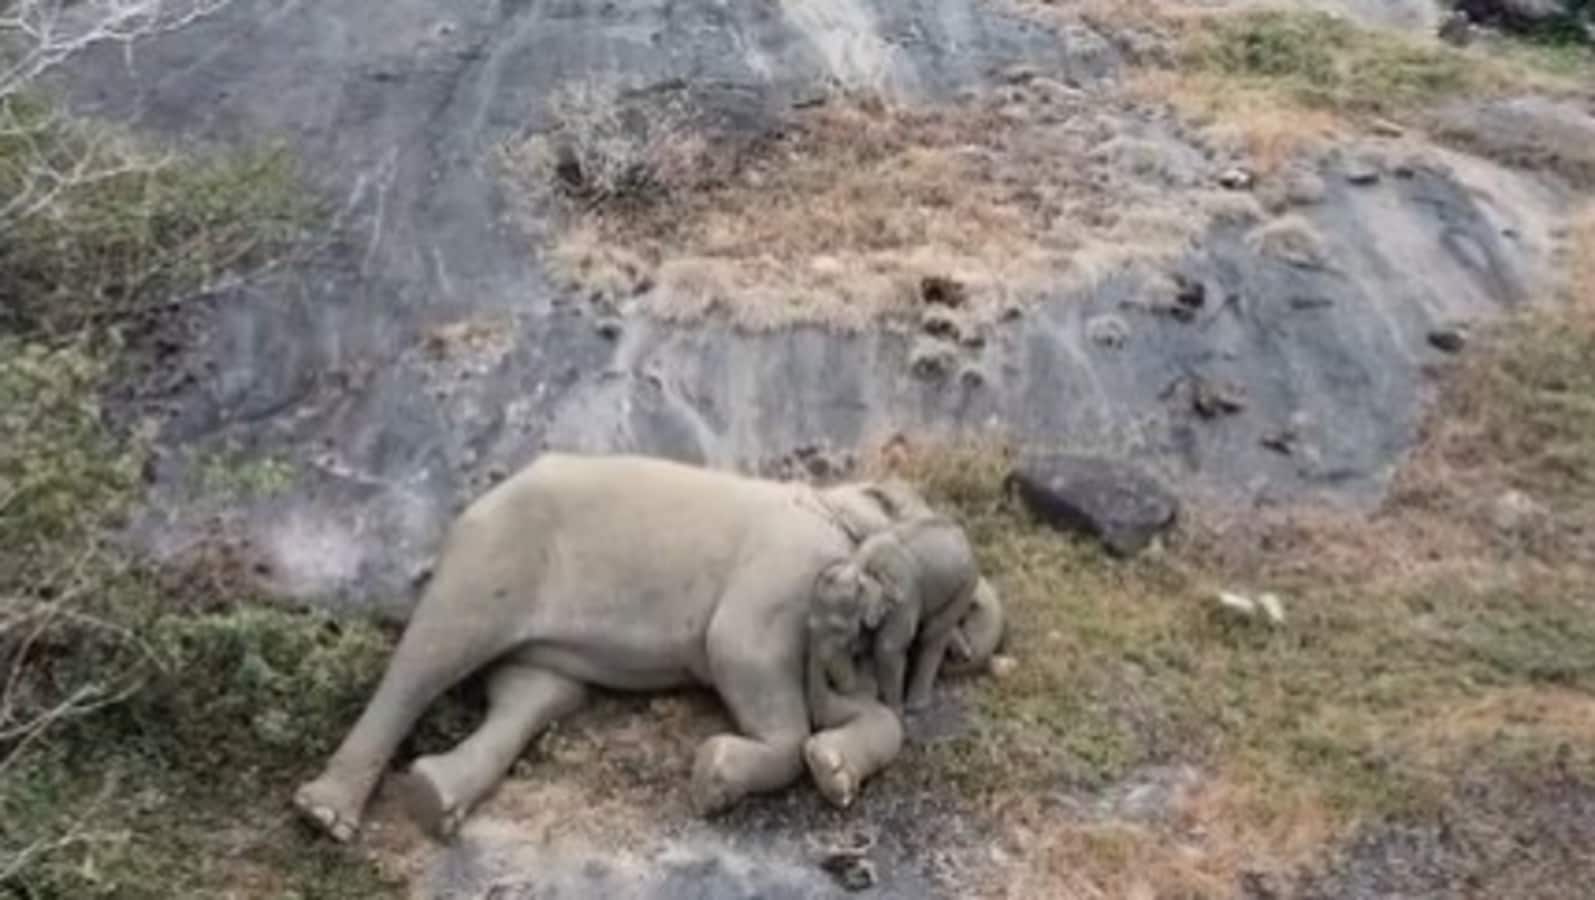 Elephant mother’s ‘reassuring hug’ to rescued baby is all about love. Watch